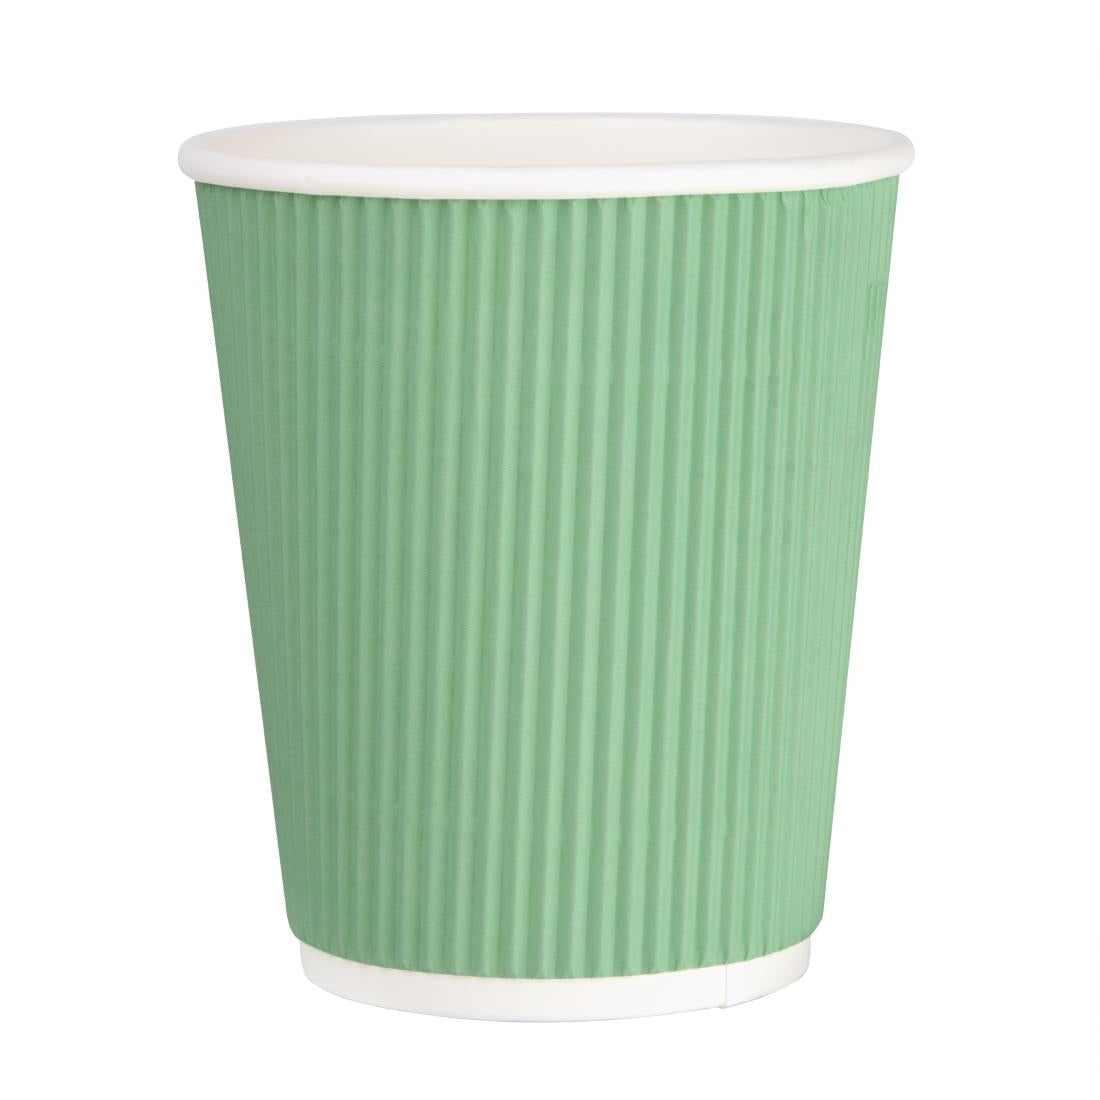 GP421 Fiesta Ripple Wall Takeaway Coffee Cups Turquoise 225ml / 8oz (Pack of 500) JD Catering Equipment Solutions Ltd